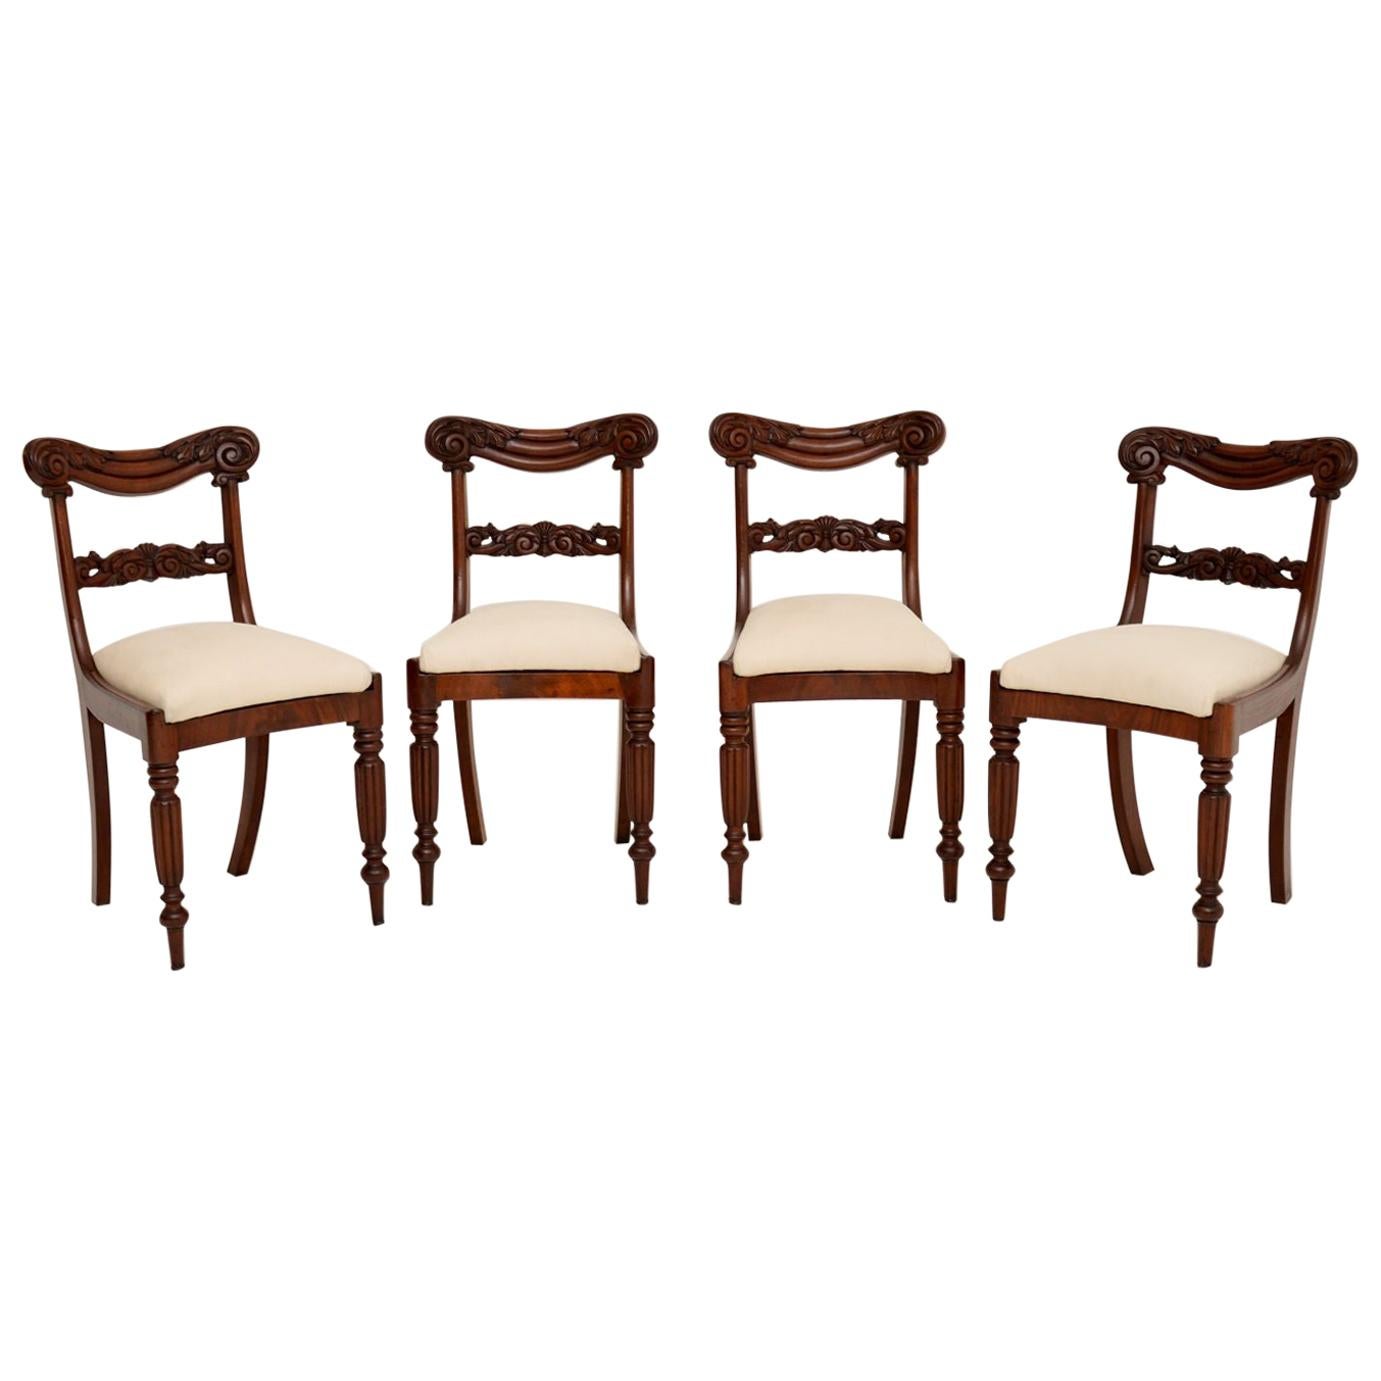 Set of 4 Antique William IV Mahogany Dining Chairs